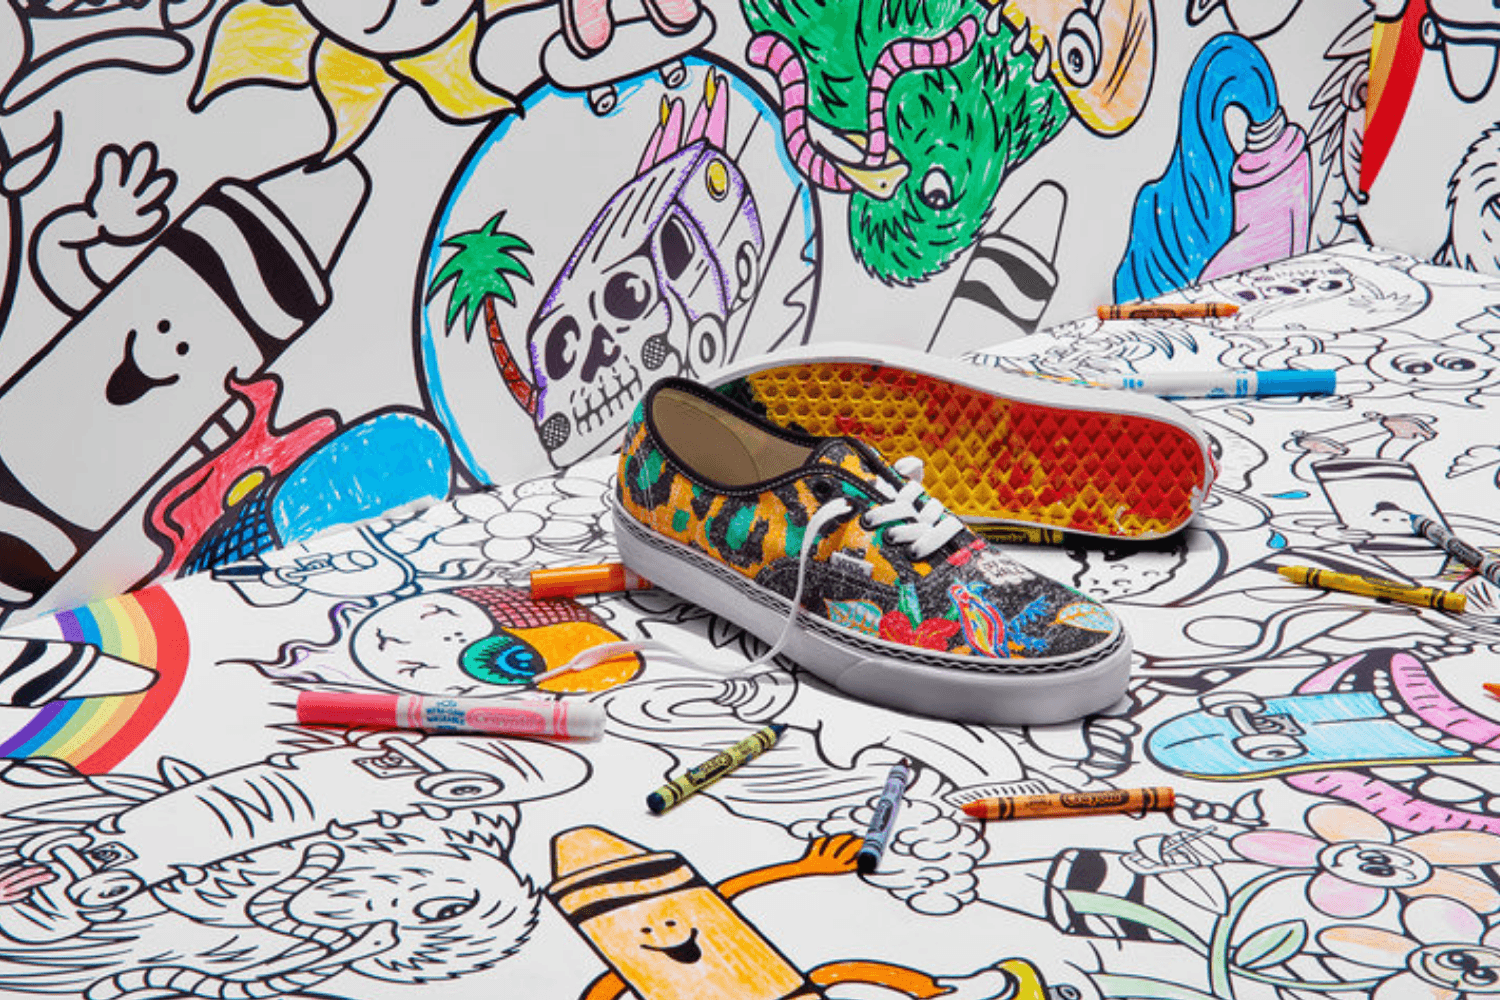 Vans and Crayola are joining forces once again